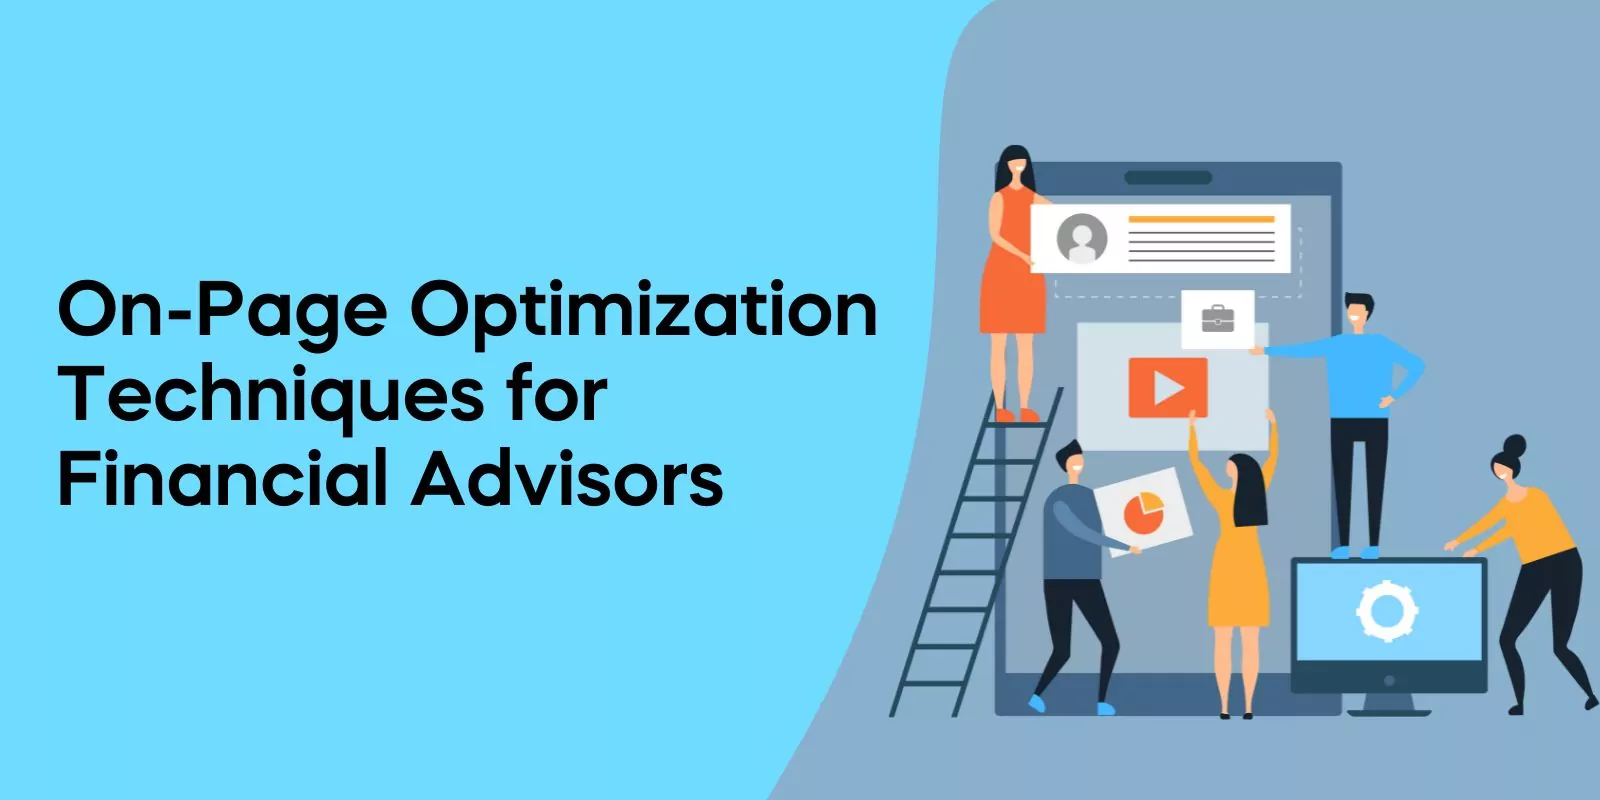 On-Page Optimization Techniques for Financial Advisors